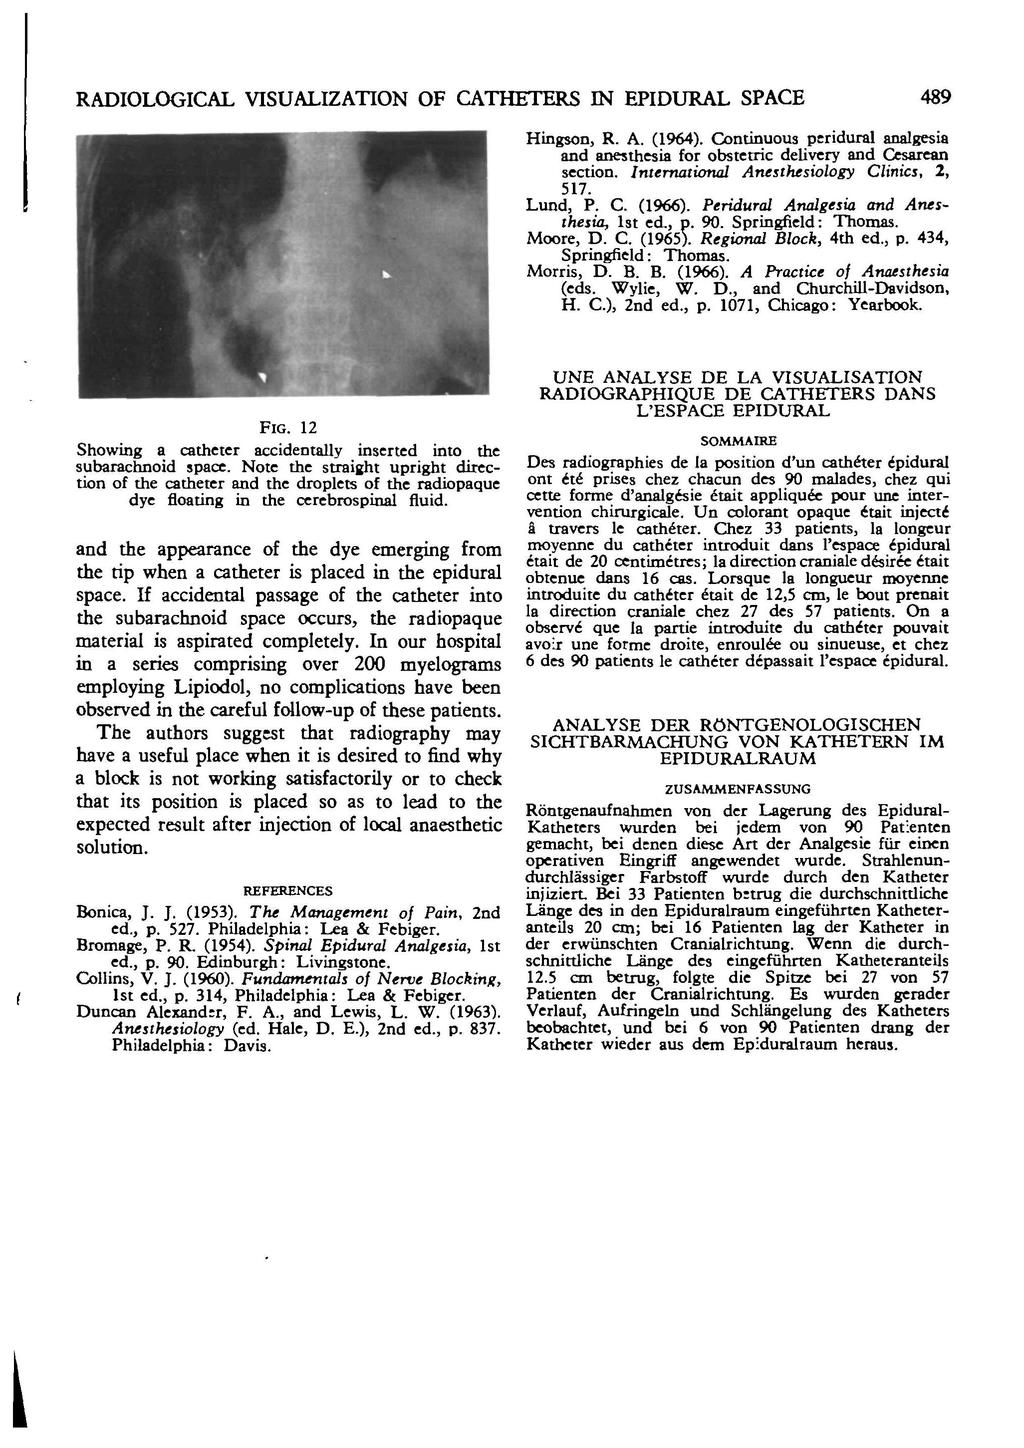 RADIOLOGICAL VISUALIZATION CATHETERS IN EPIDURAL SPACE 489 Hingson, R. A. (1964). Continuous peridural analgesia and anesthesia for obstetric delivery and Cesarean section.